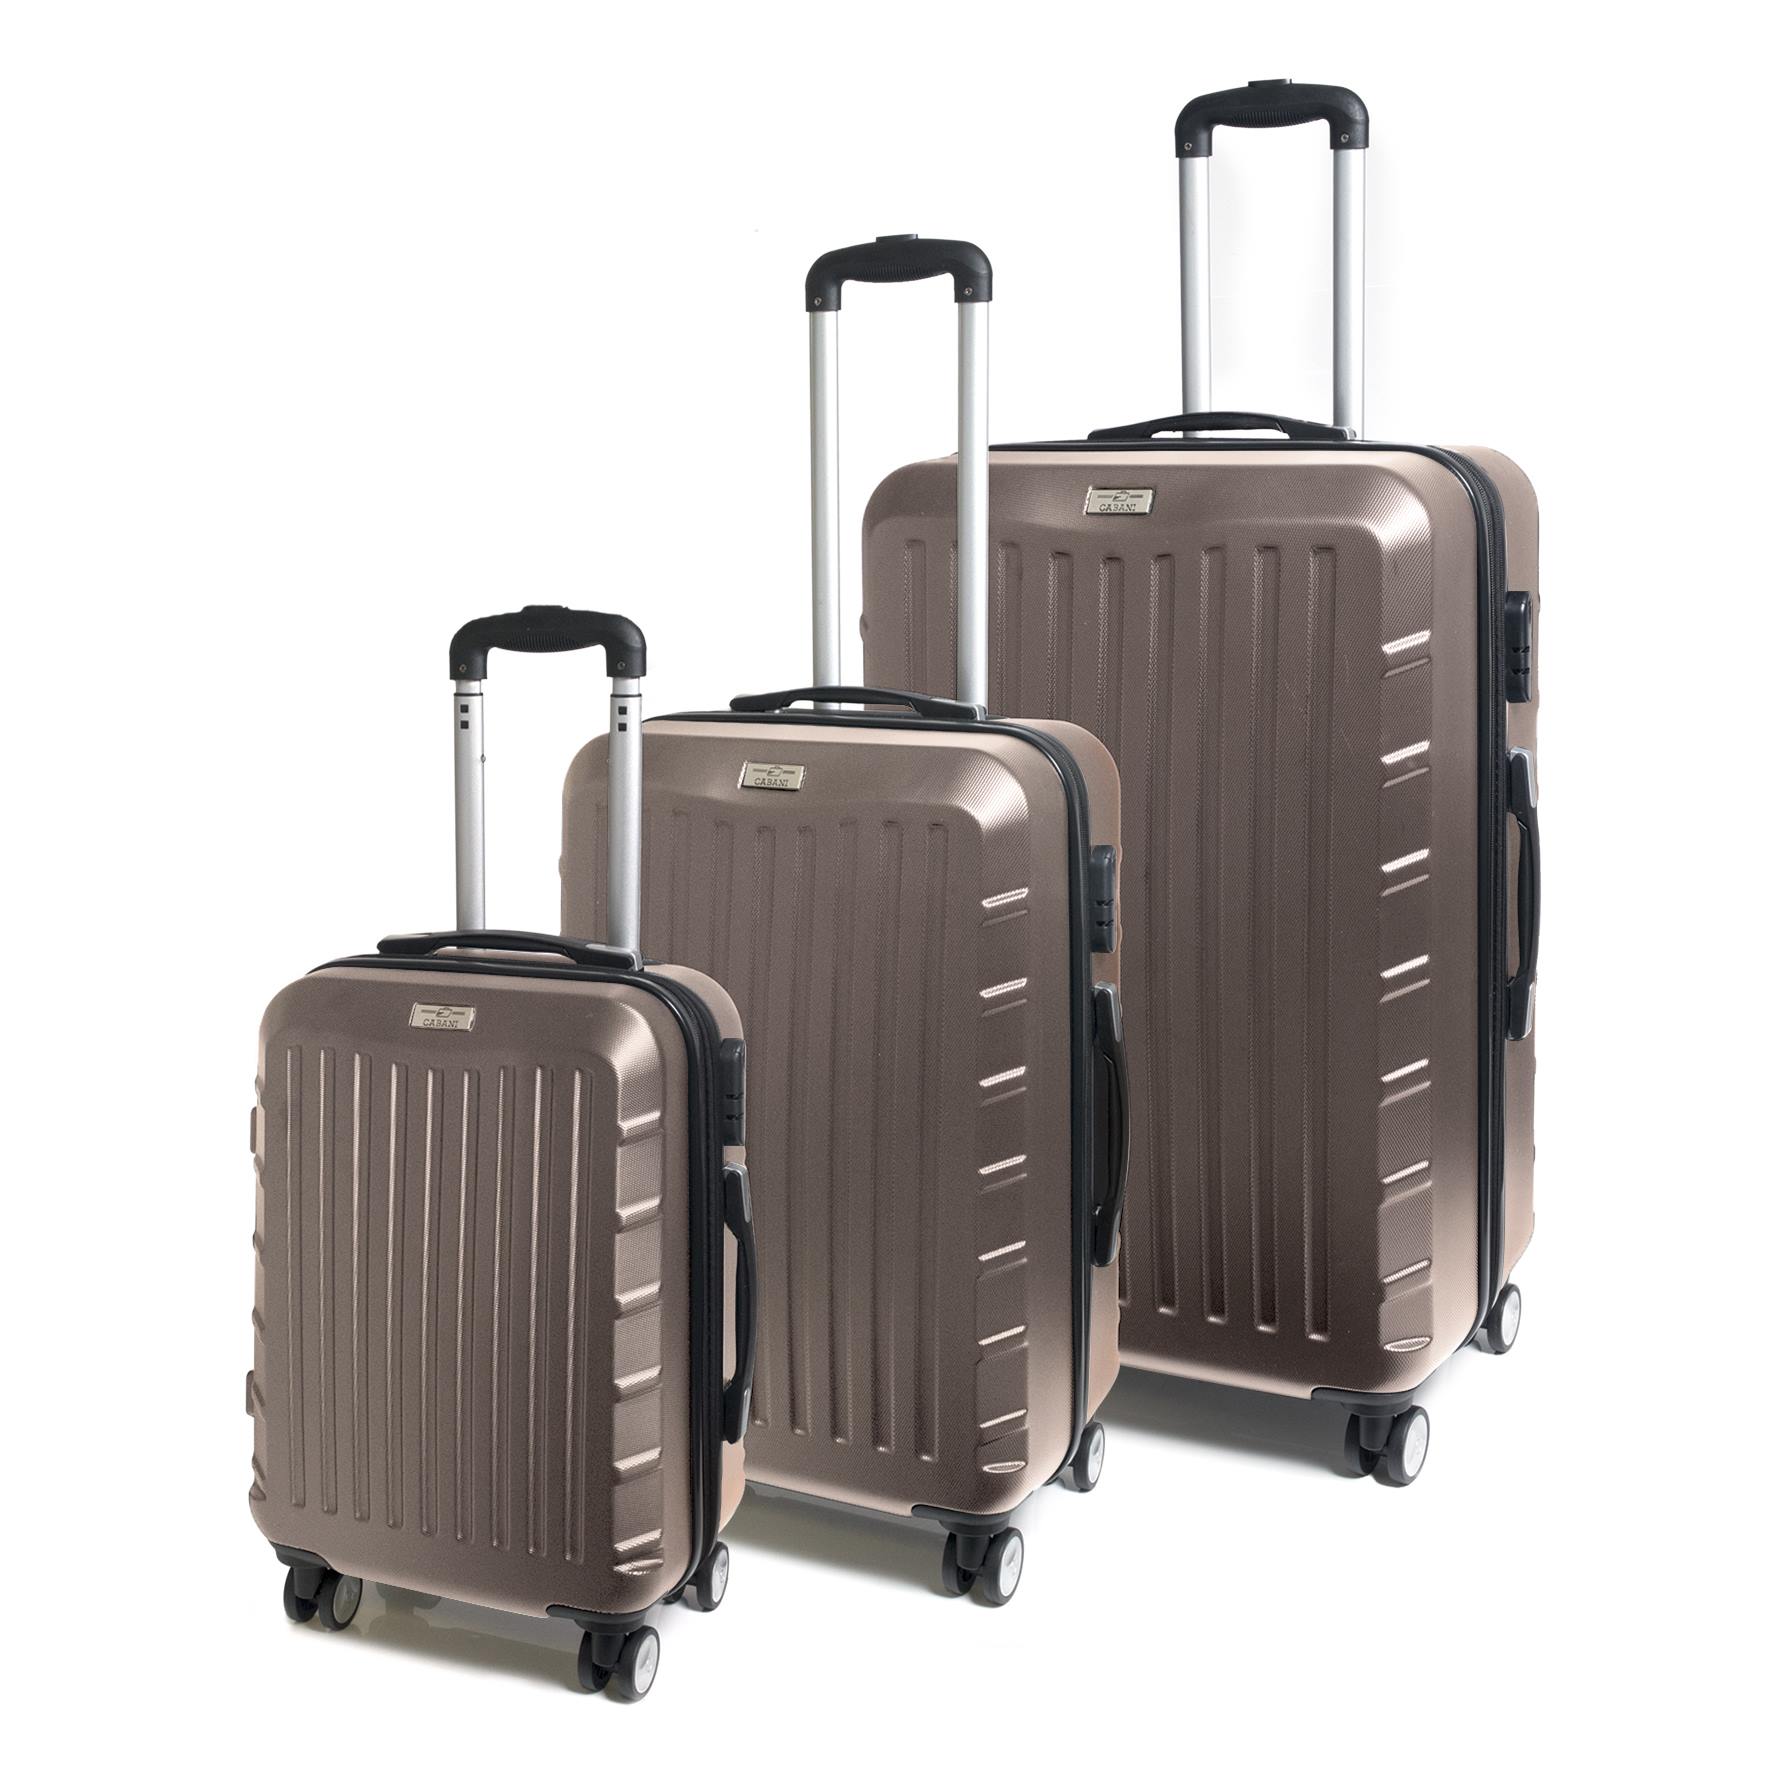 Luggage Bags — Travel Bags & Luggage in Alice Springs, NT